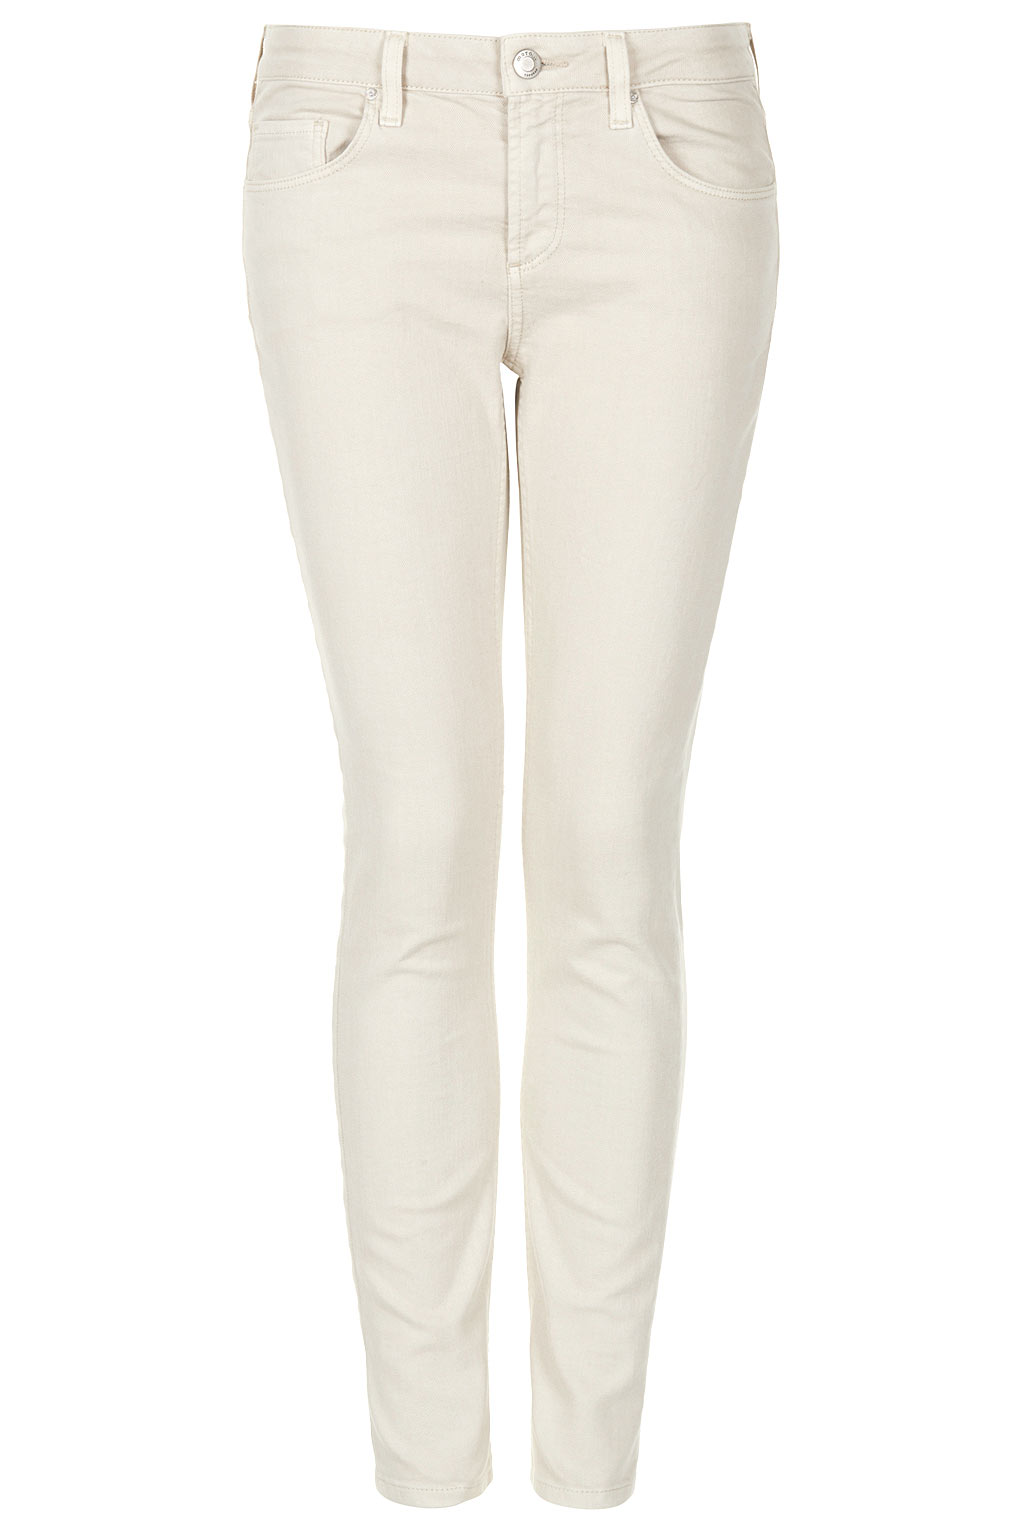 TOPSHOP Cream Baxter Skinny Jeans in Natural - Lyst